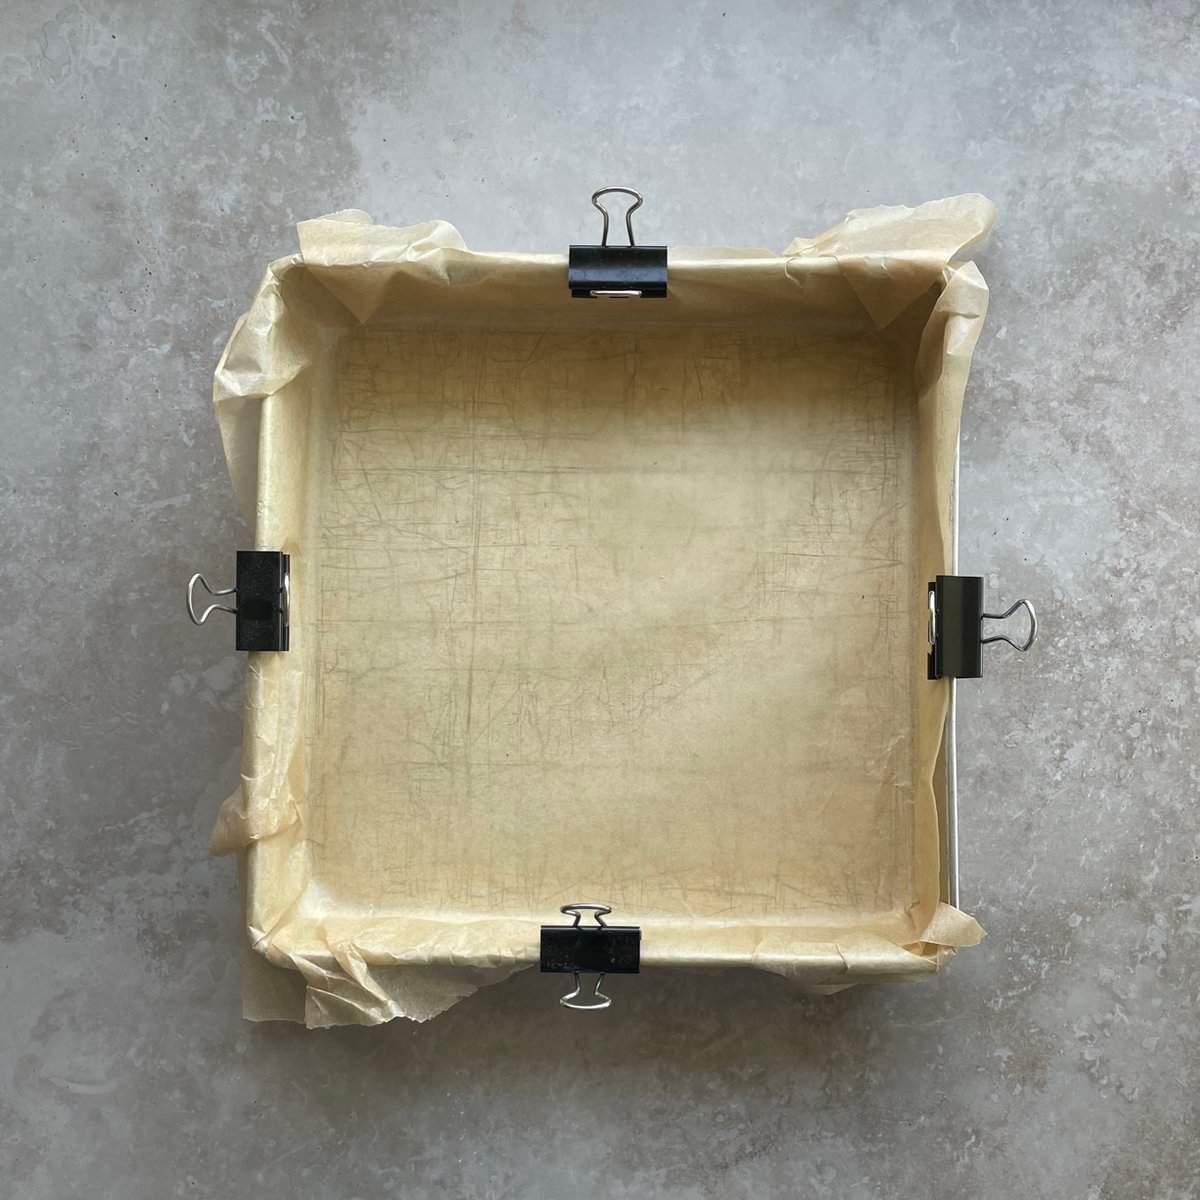 square baking pan lined with parchment paper held in place with binder clips.